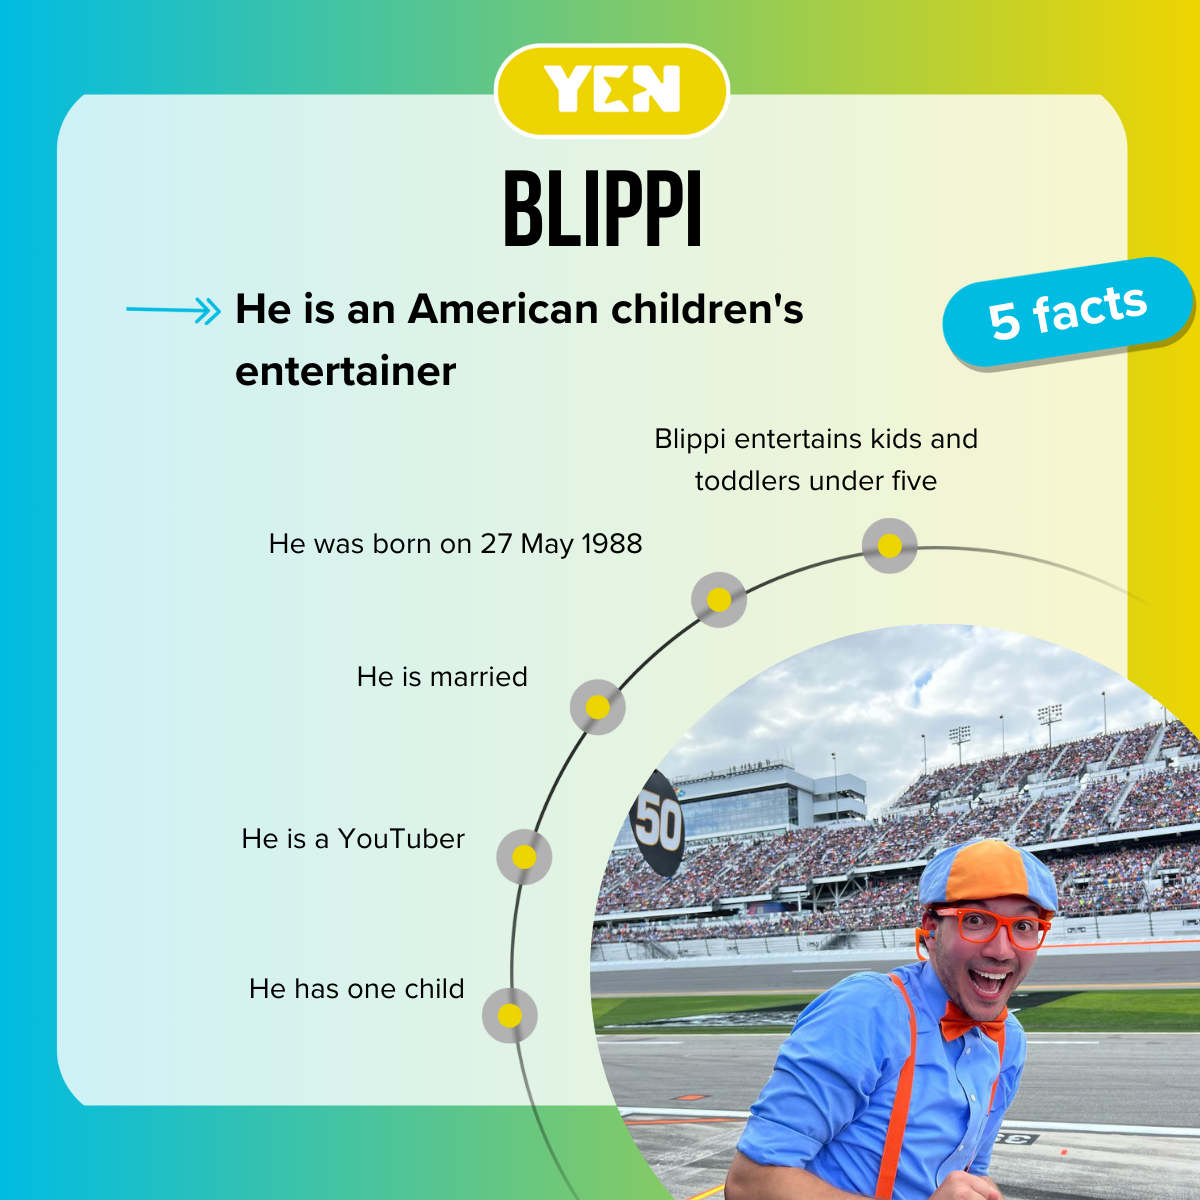 Top 5 facts about Blippi